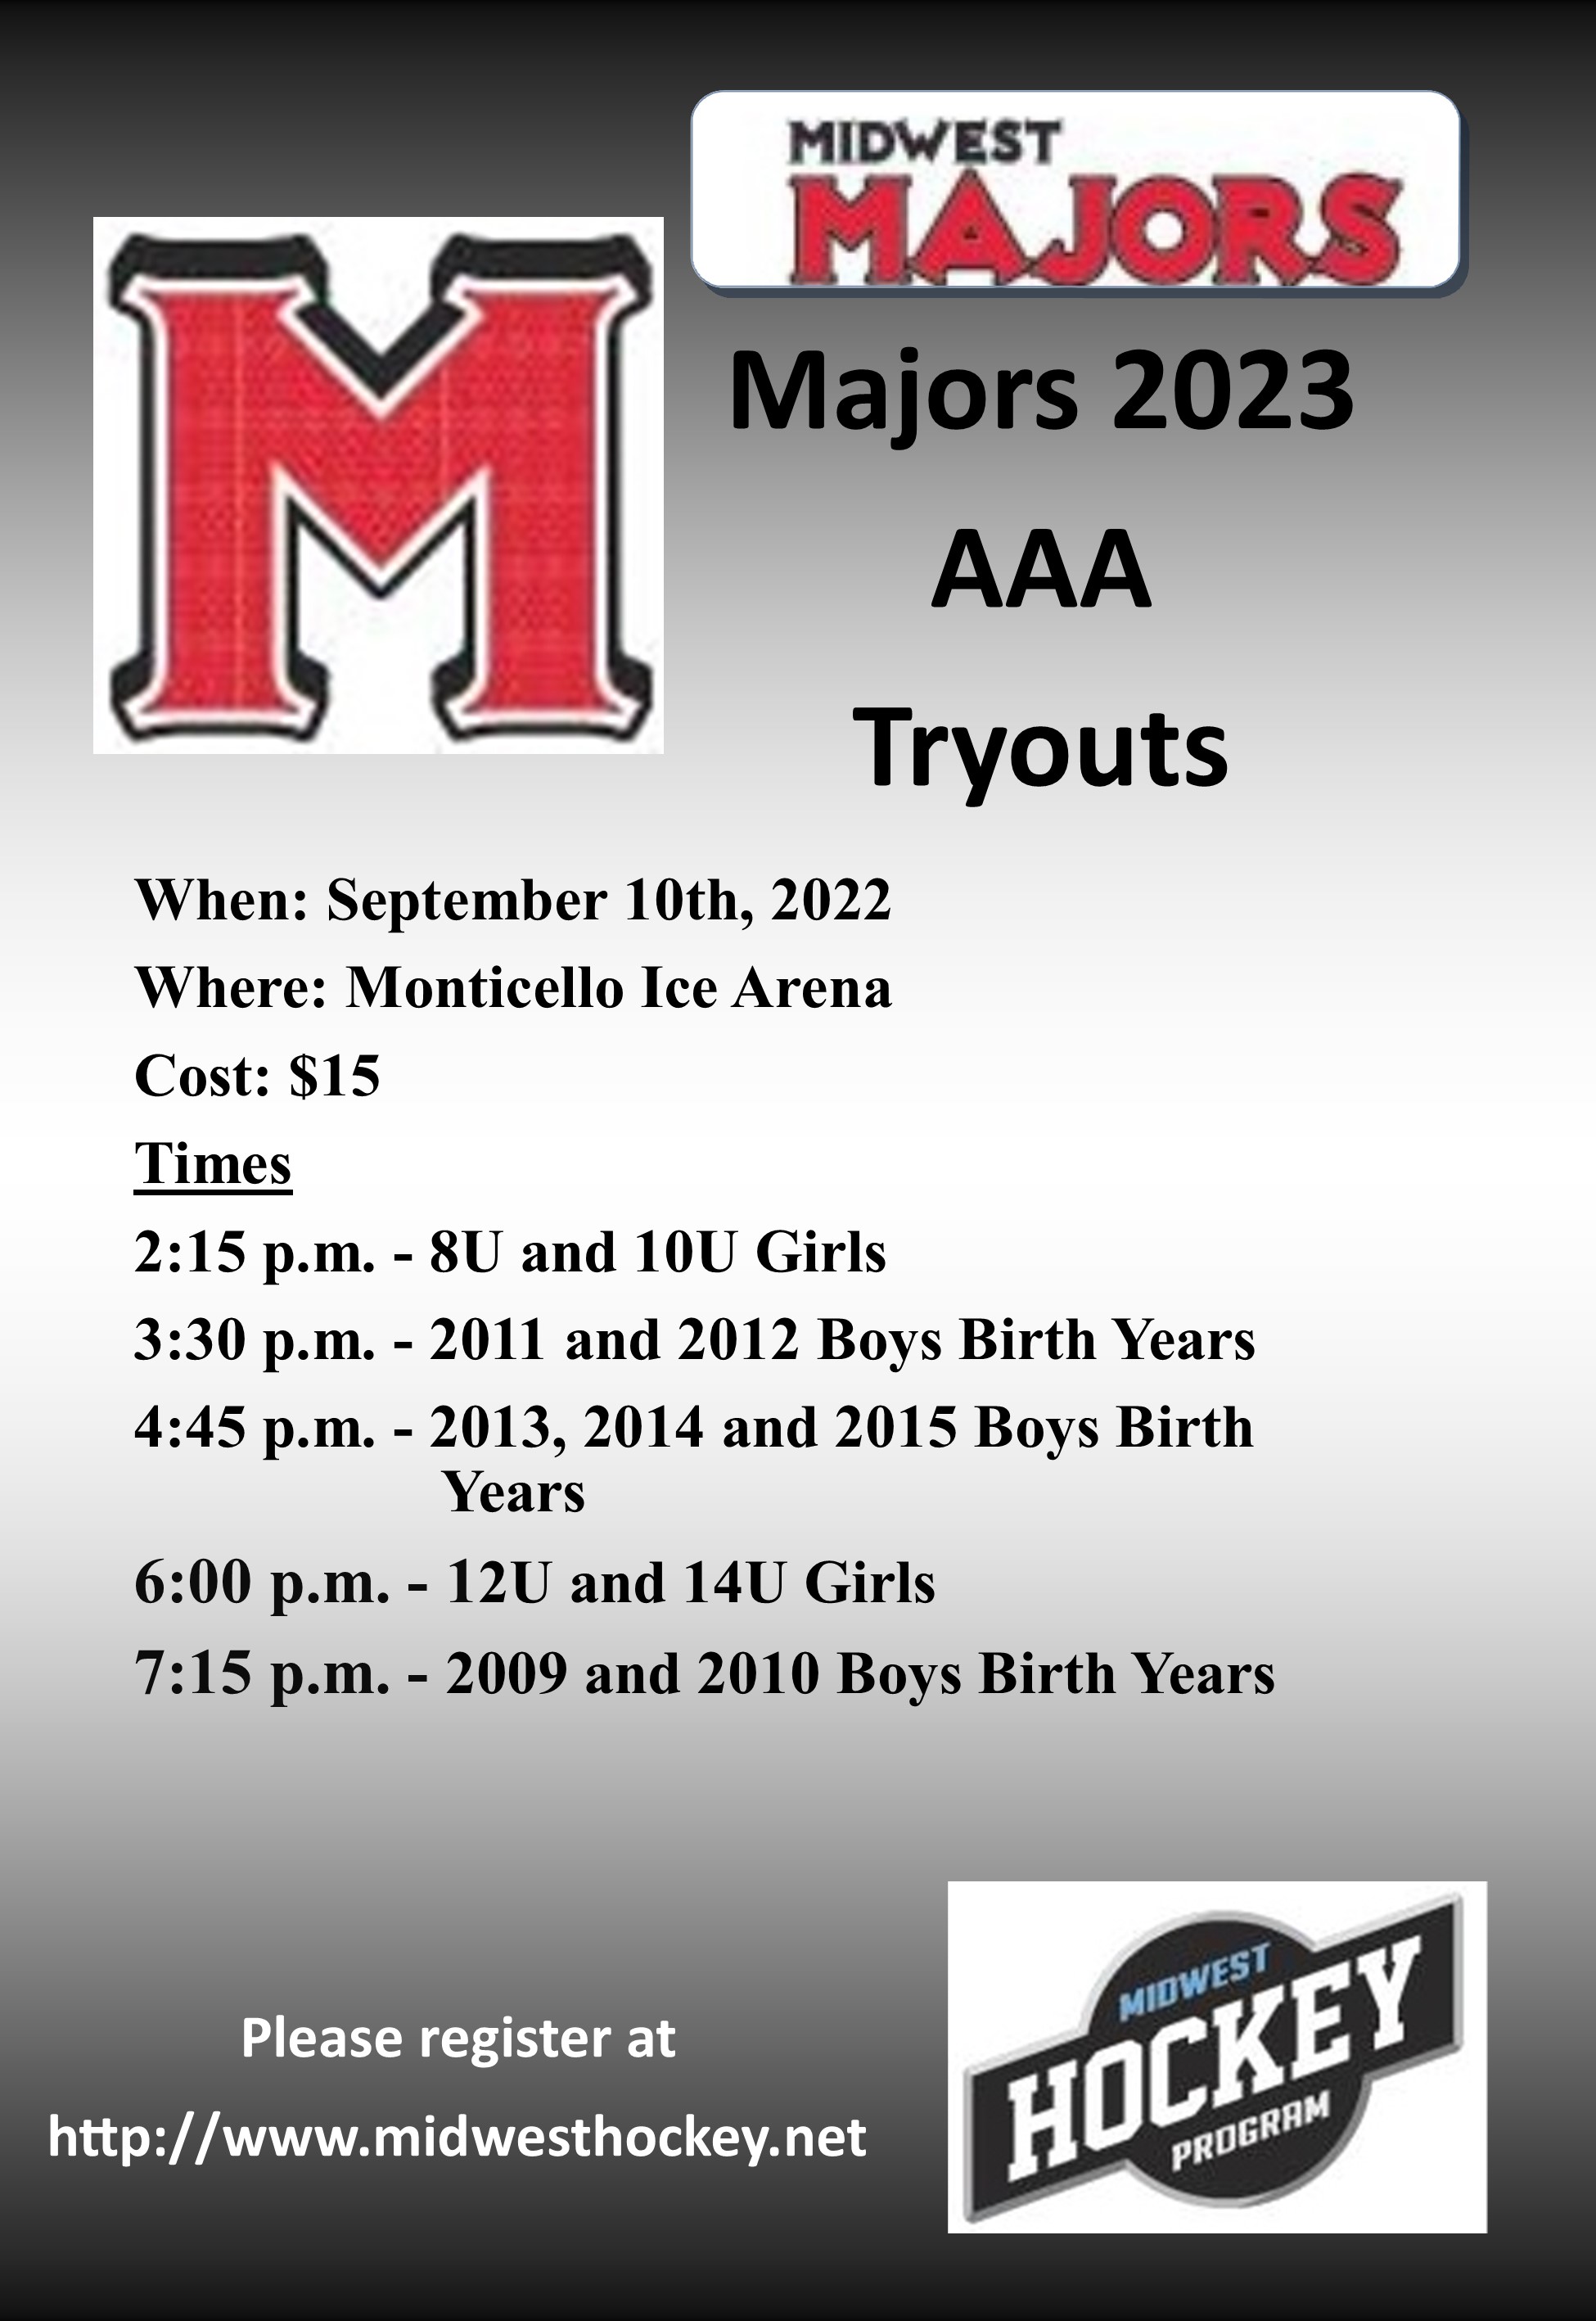 Majors 2023 AAA Tryouts Midwest Majors